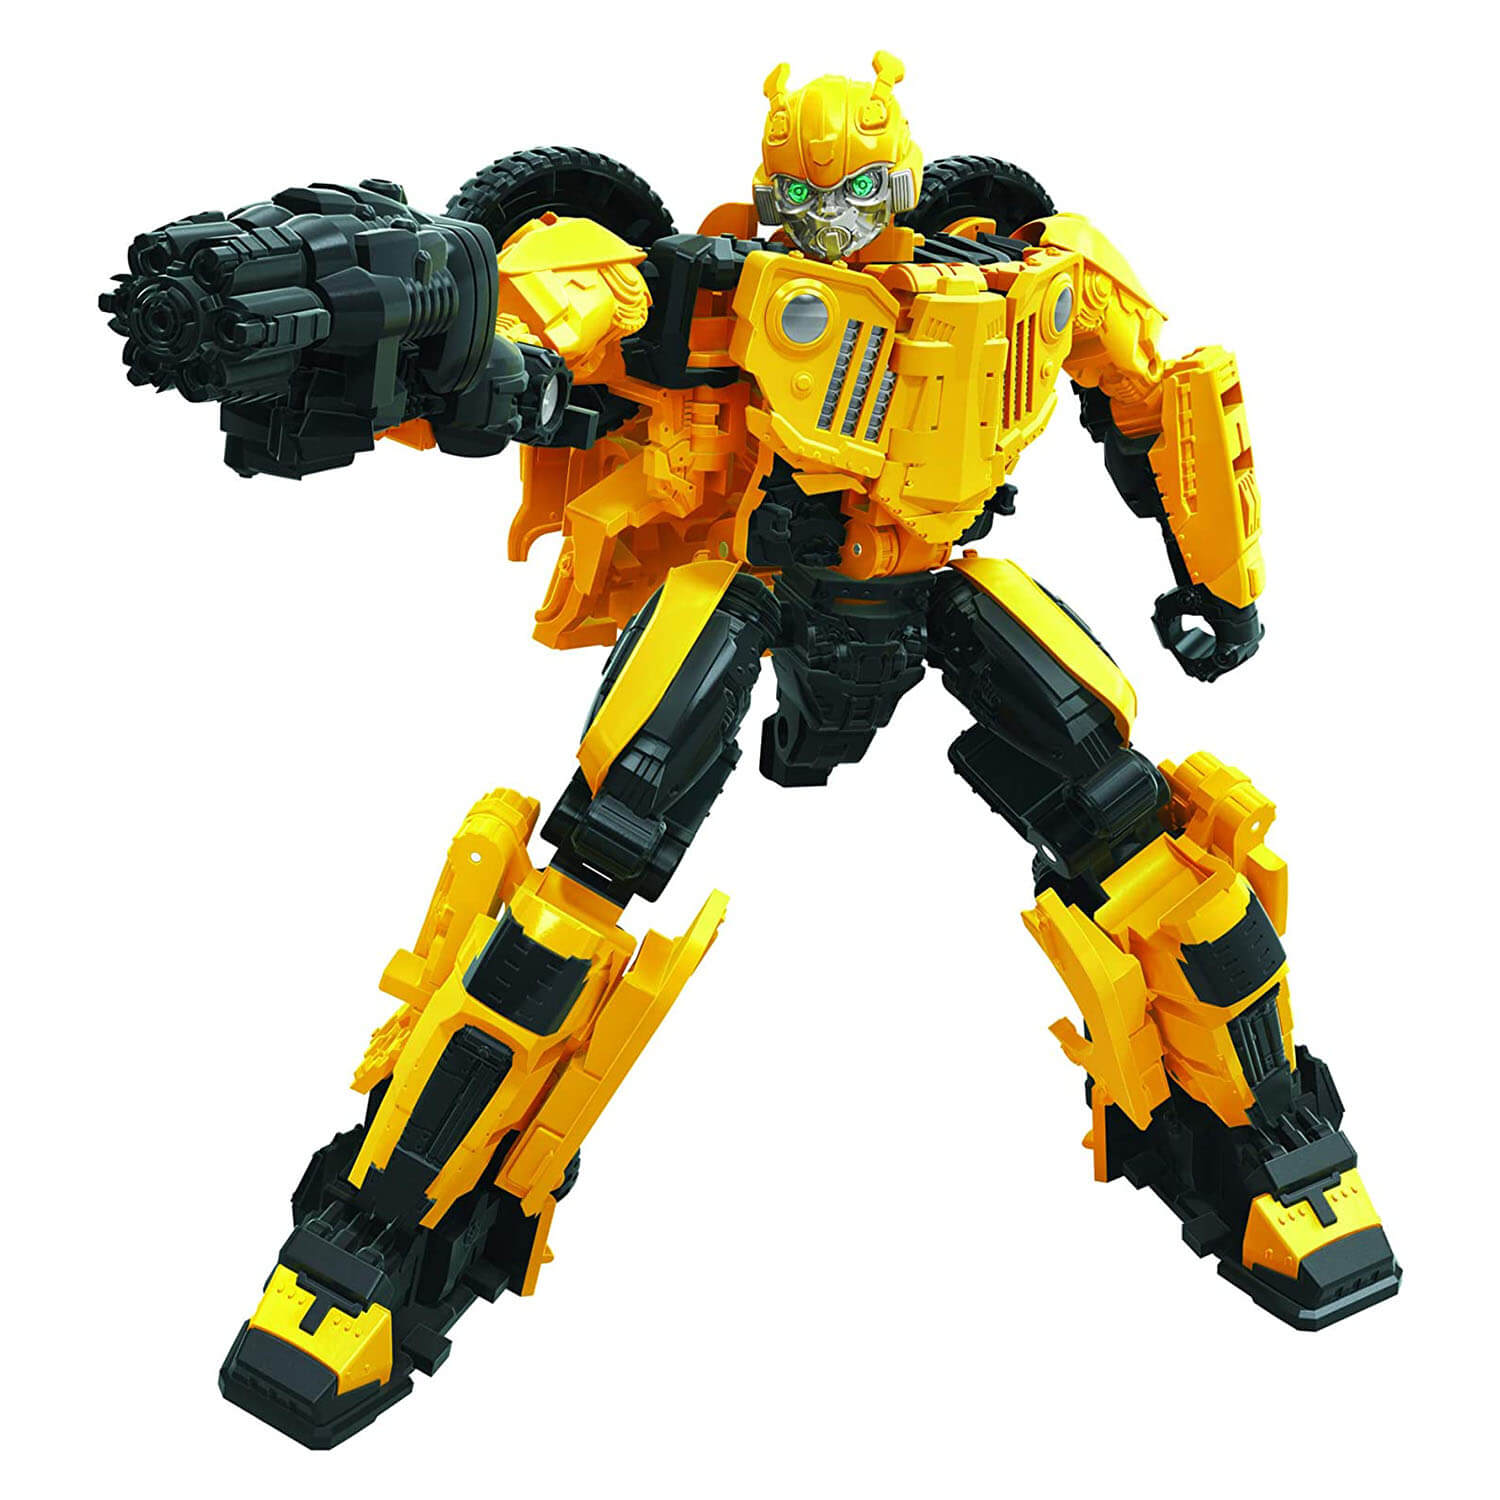 Front view of the transformers figure.